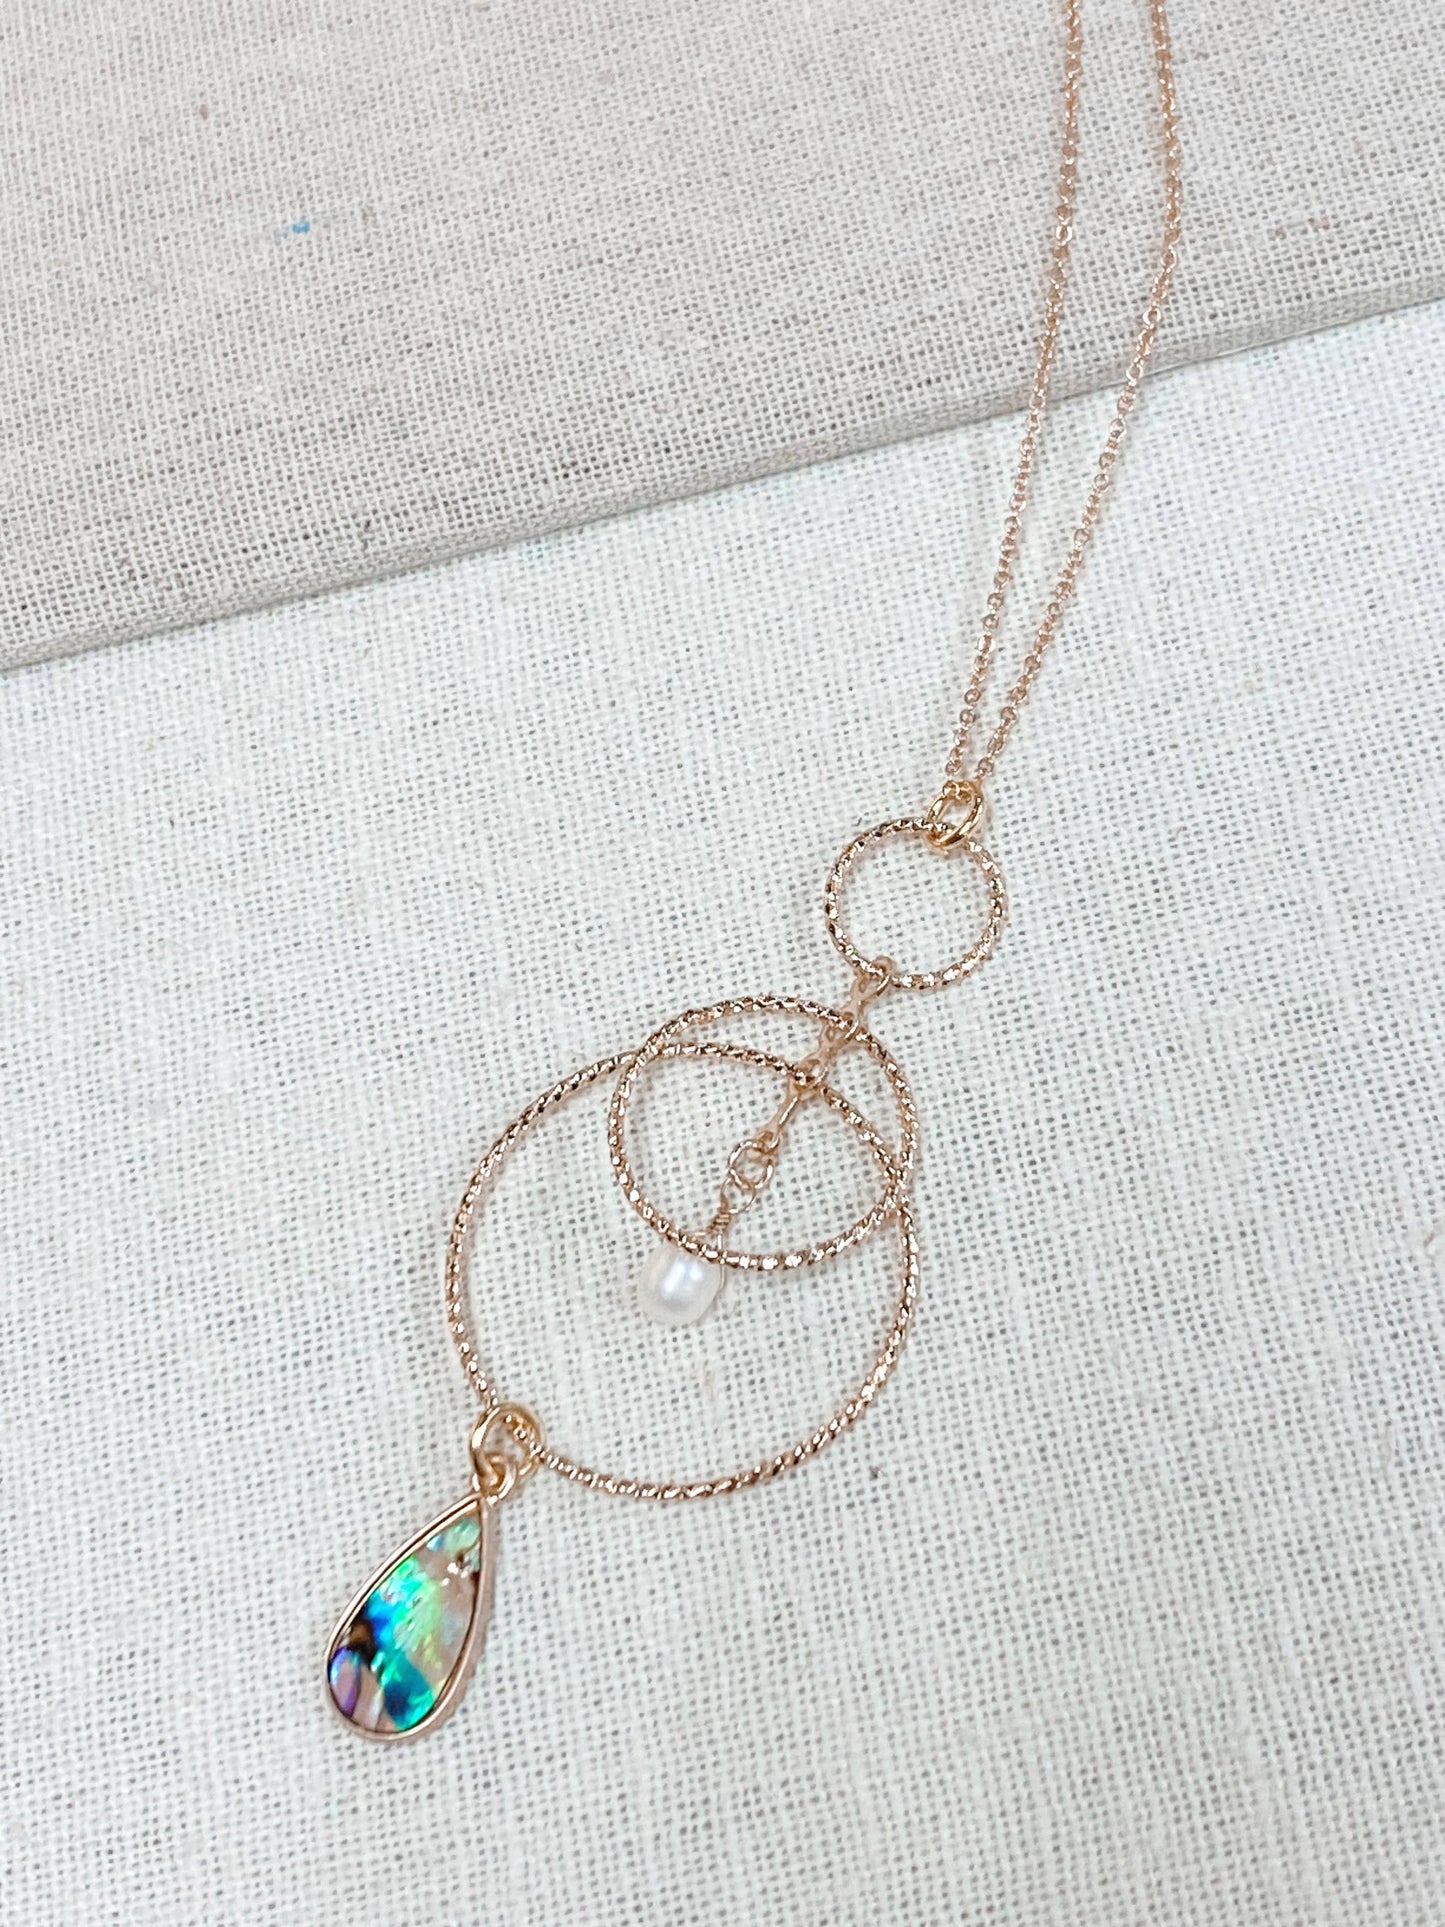 Gracie Rose Designs - Freshwater Pearl & Abalone Inlay Drop Pendant Long Necklace: Gold